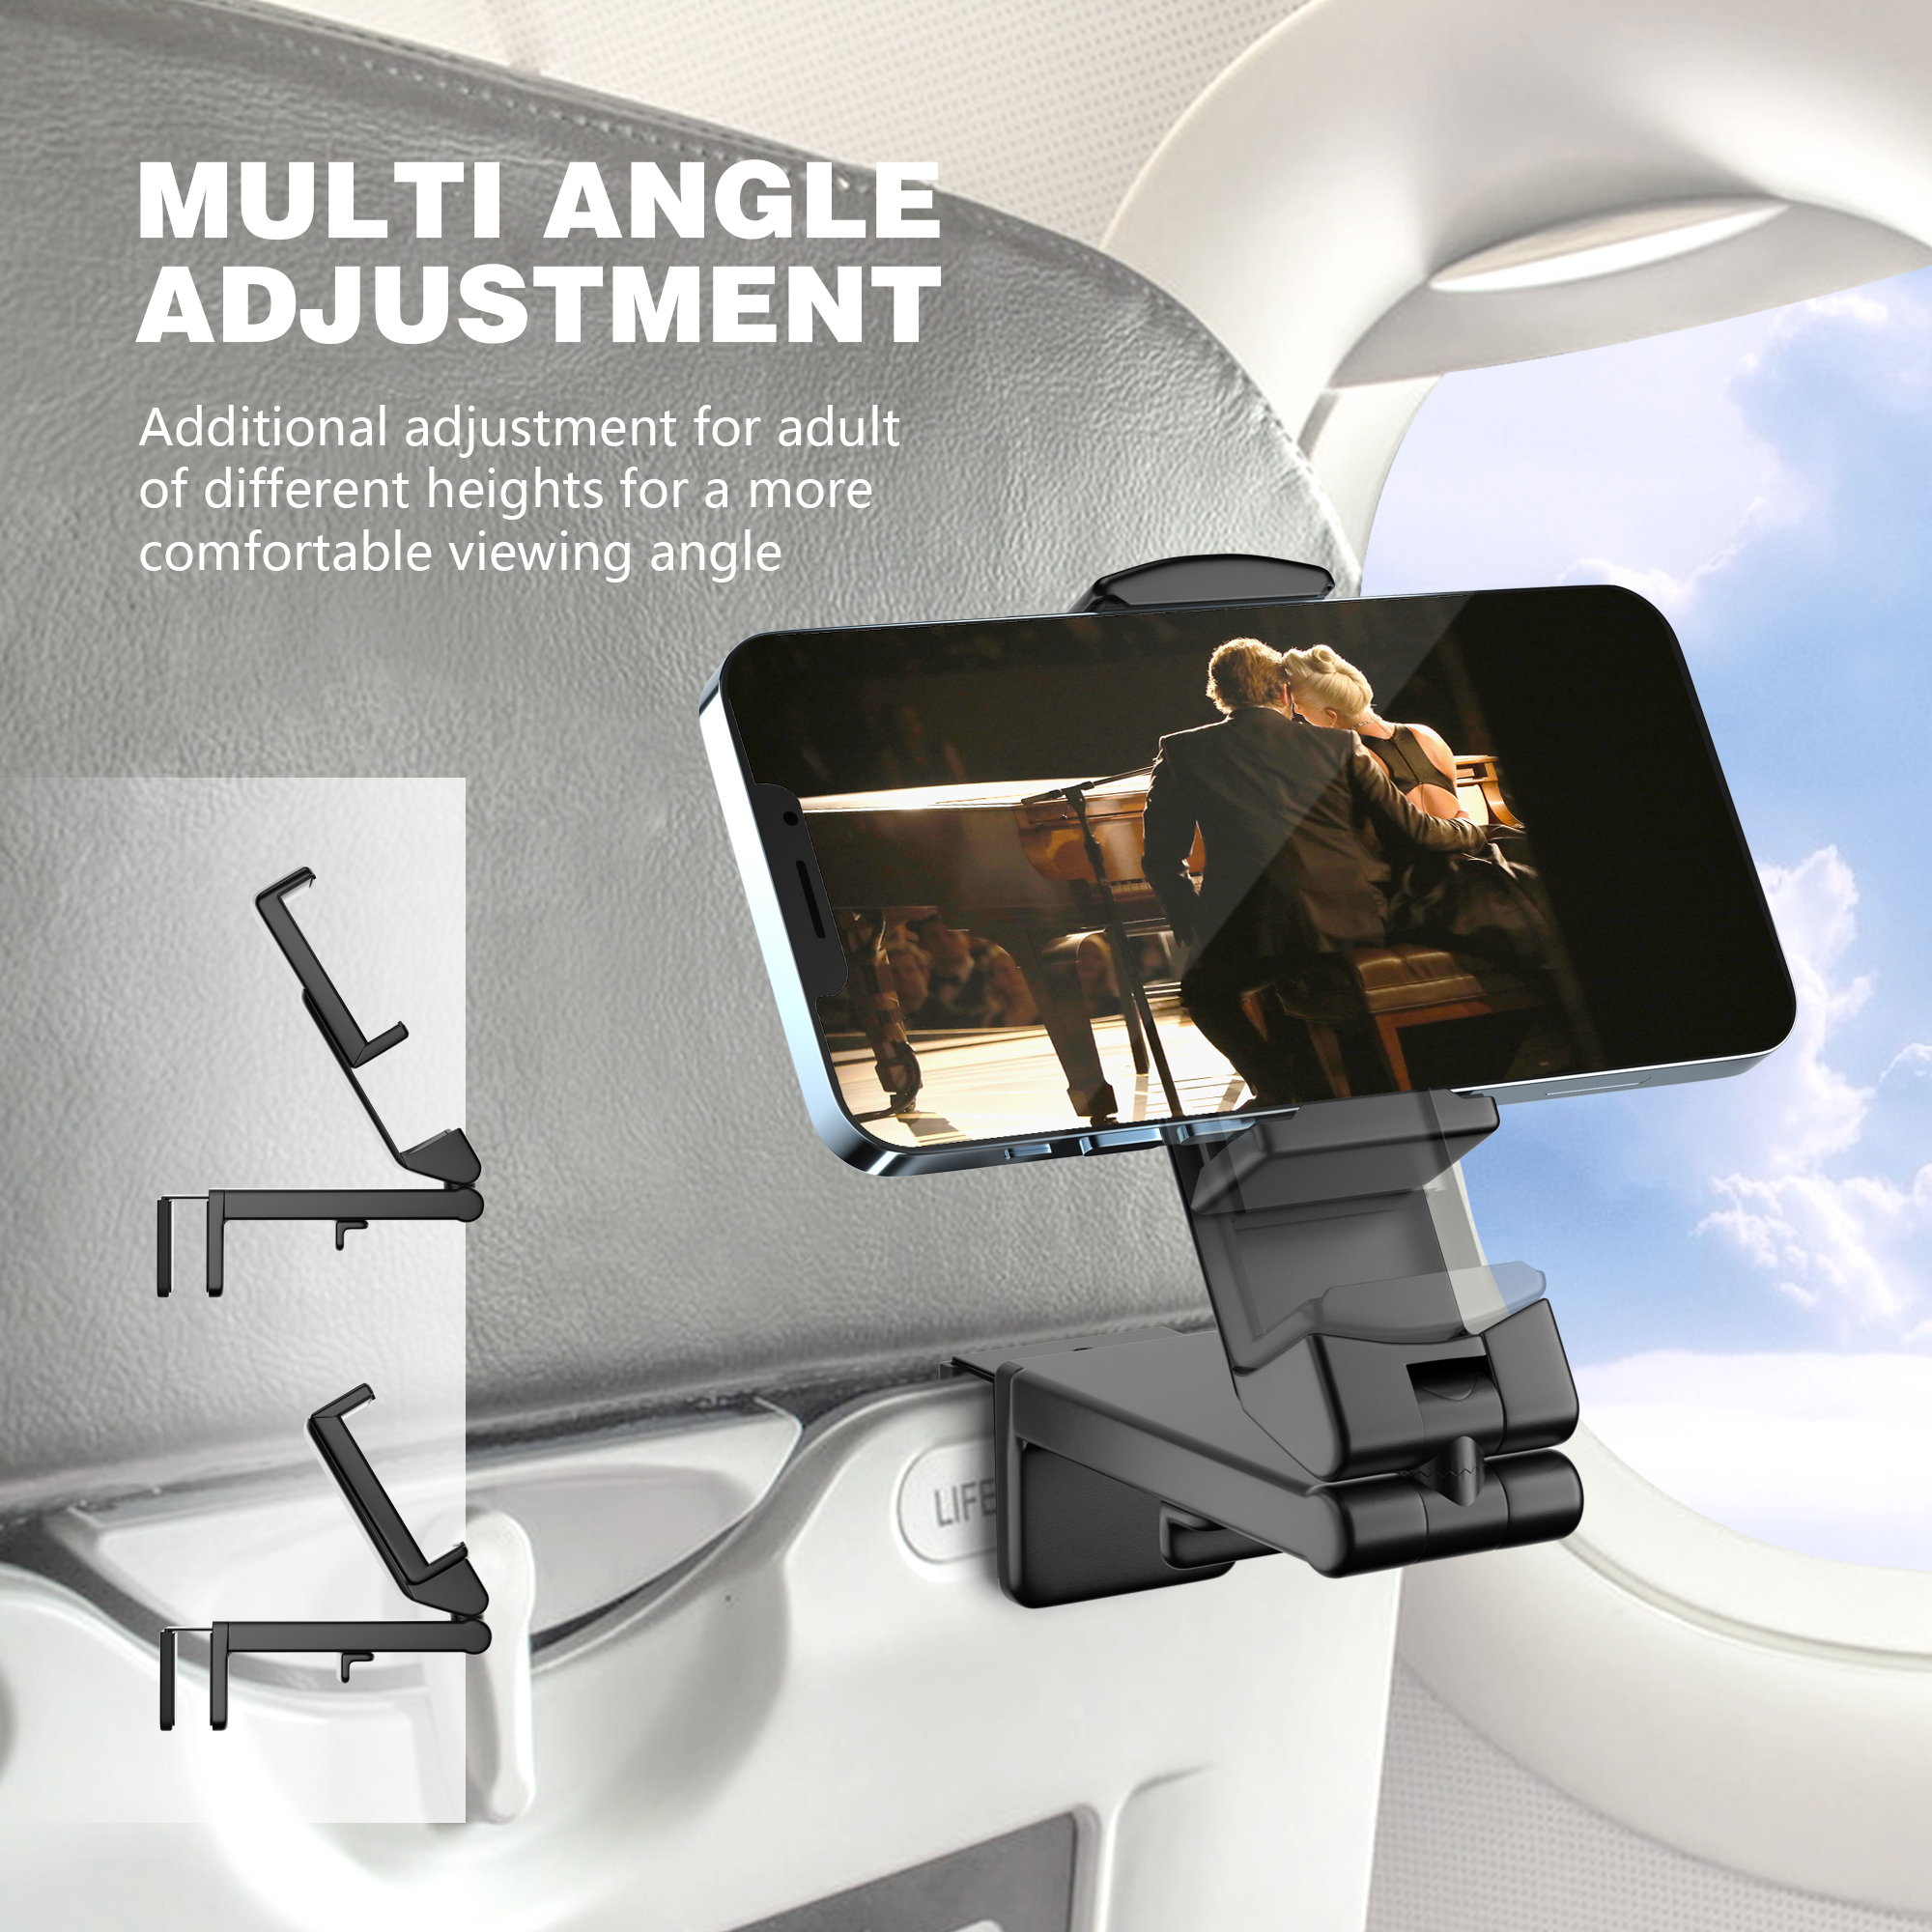 Perilogics Universal Airplane in Flight Phone Mount. Handsfree Phone Holder with Multi-Directional Dual 360 Degree Rotation. Use As Phone Stand, Handheld, Mount On Table Or Cabinet. - image 4 of 8